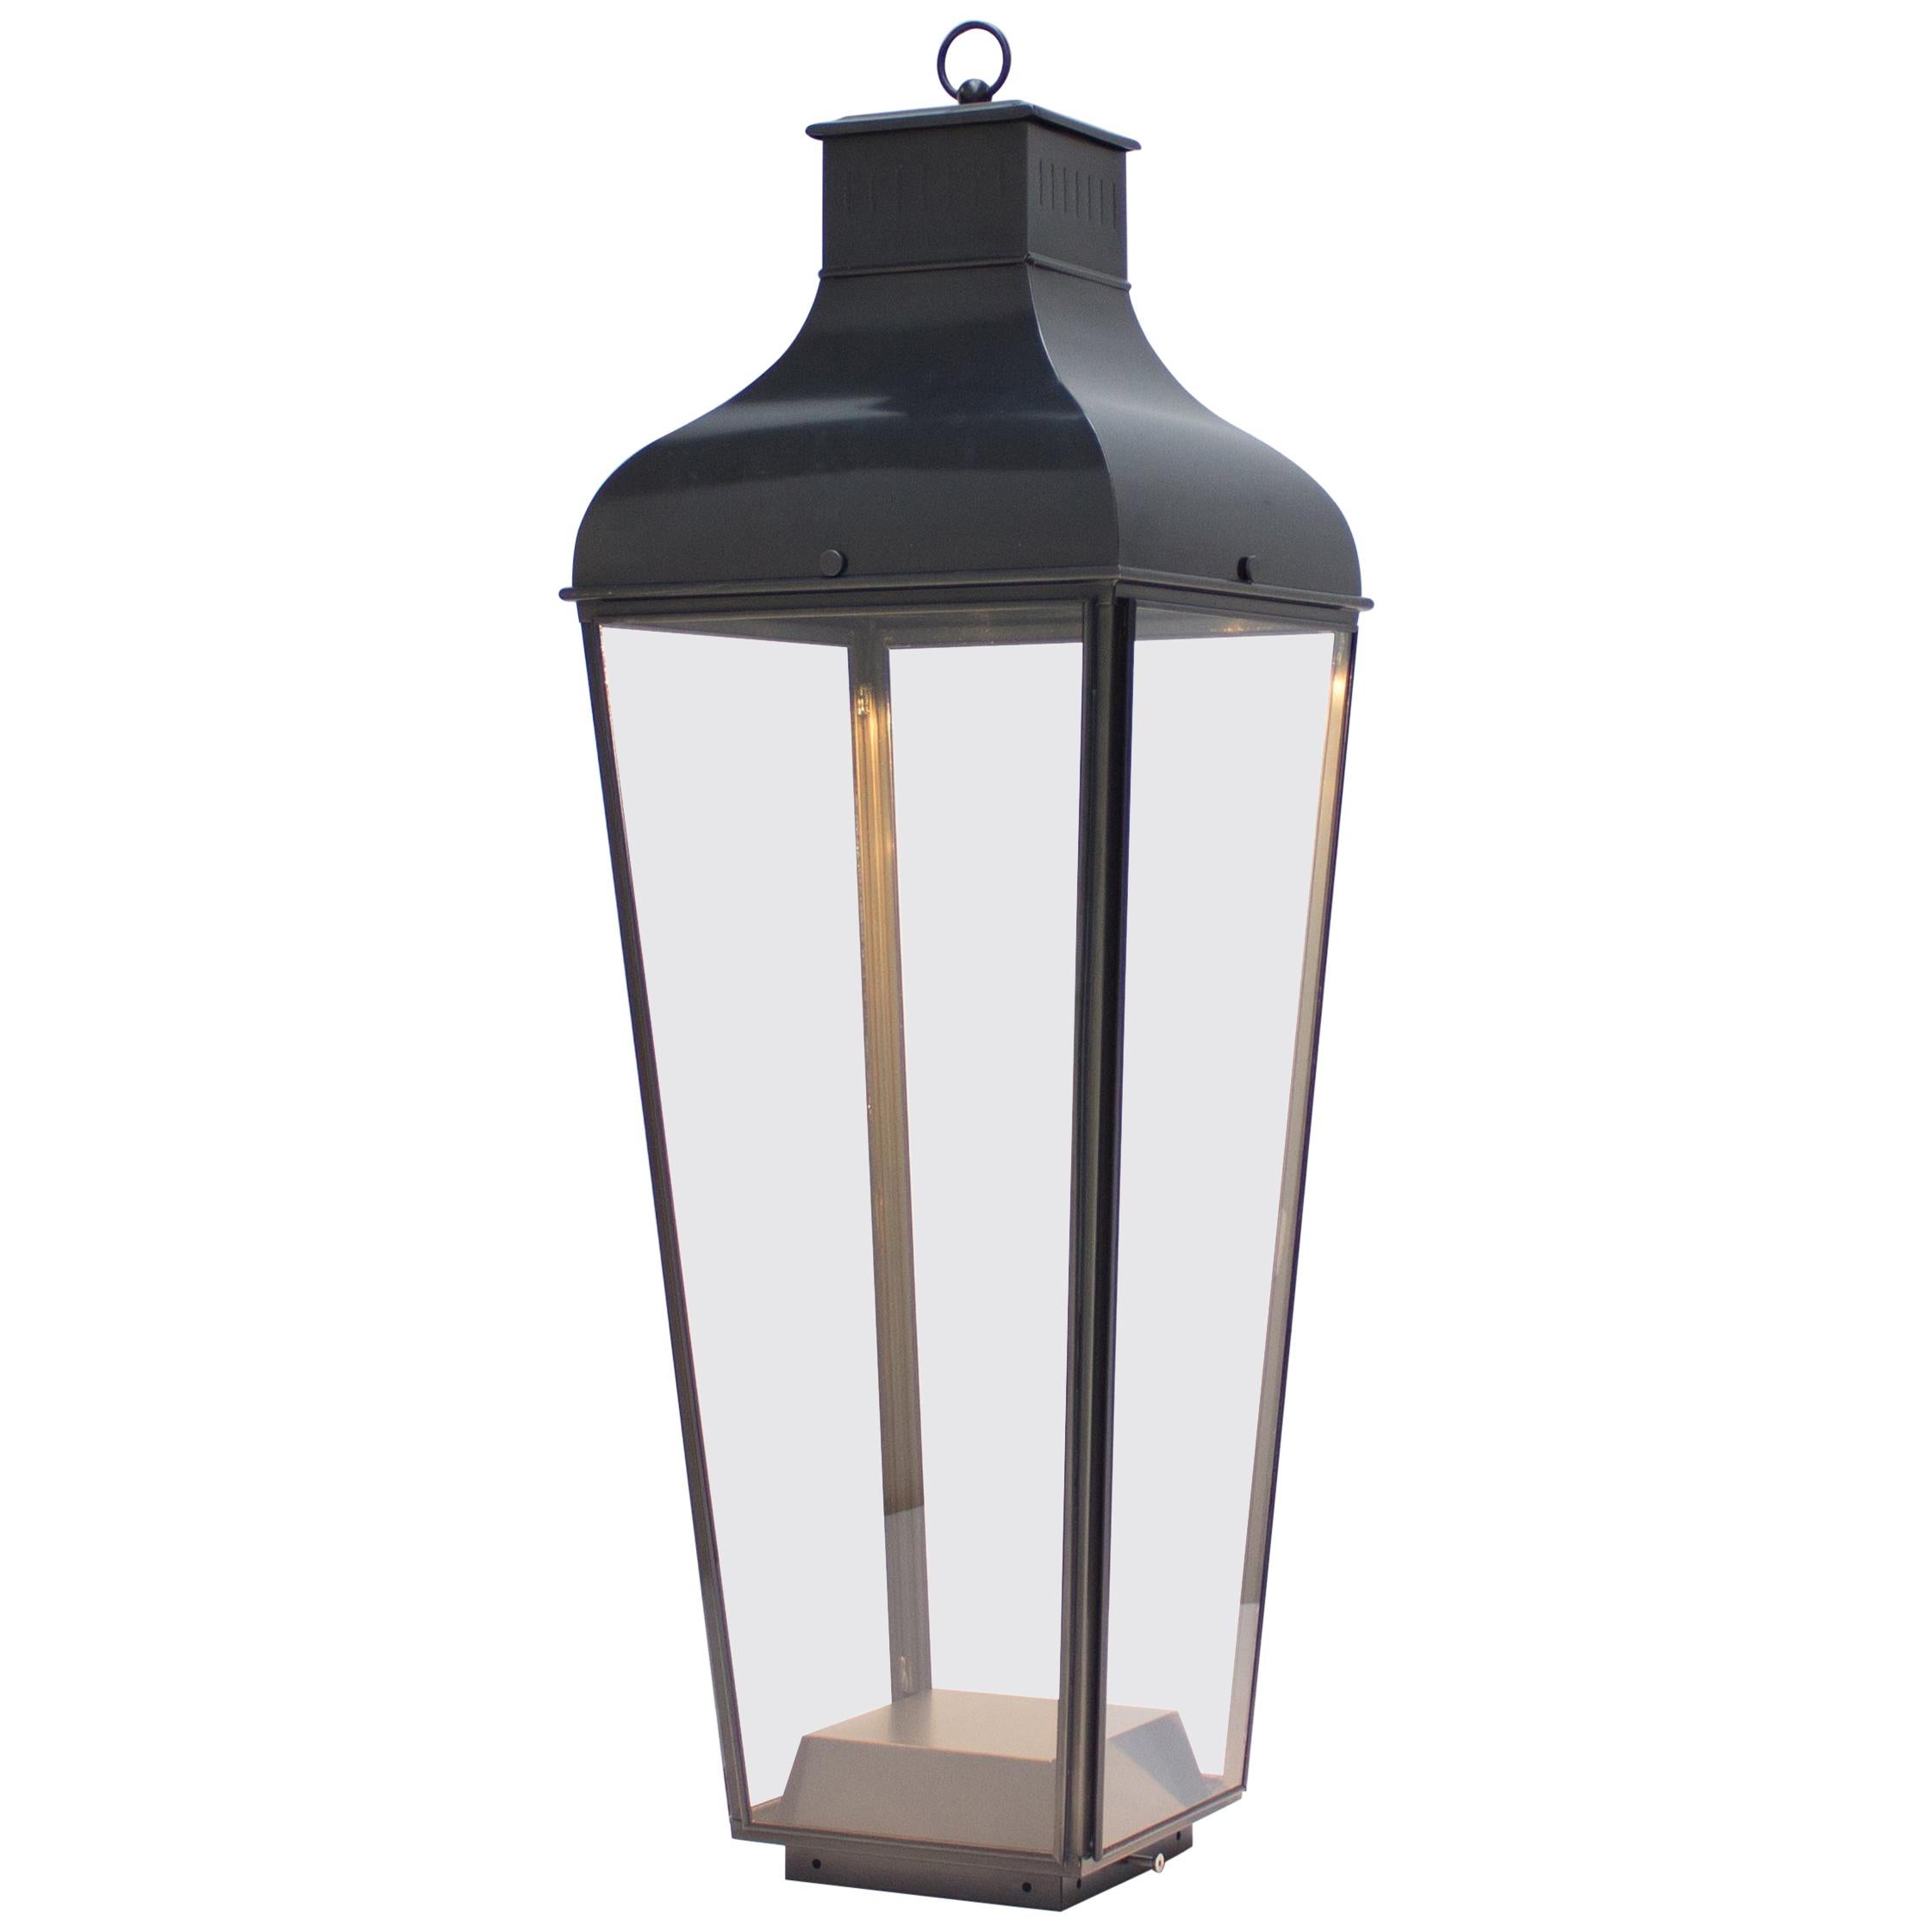 Tekna Montrose Floor Lantern with Dark Bronze Finish and Clear Glass For Sale